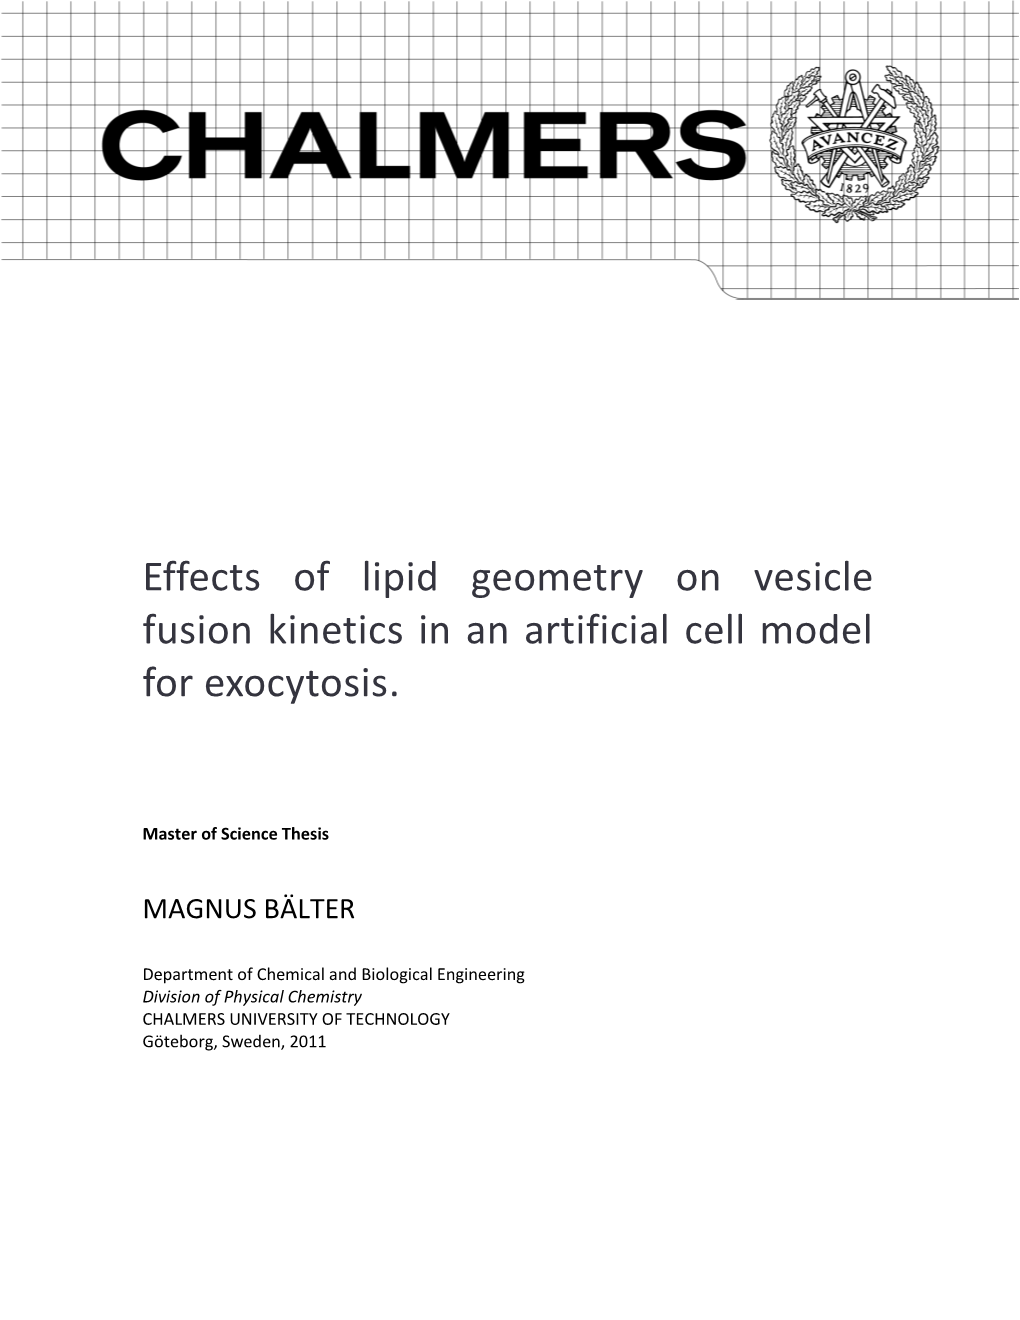 Effects of Lipid Geometry on Vesicle Fusion Kinetics in an Artificial Cell Model for Exocytosis